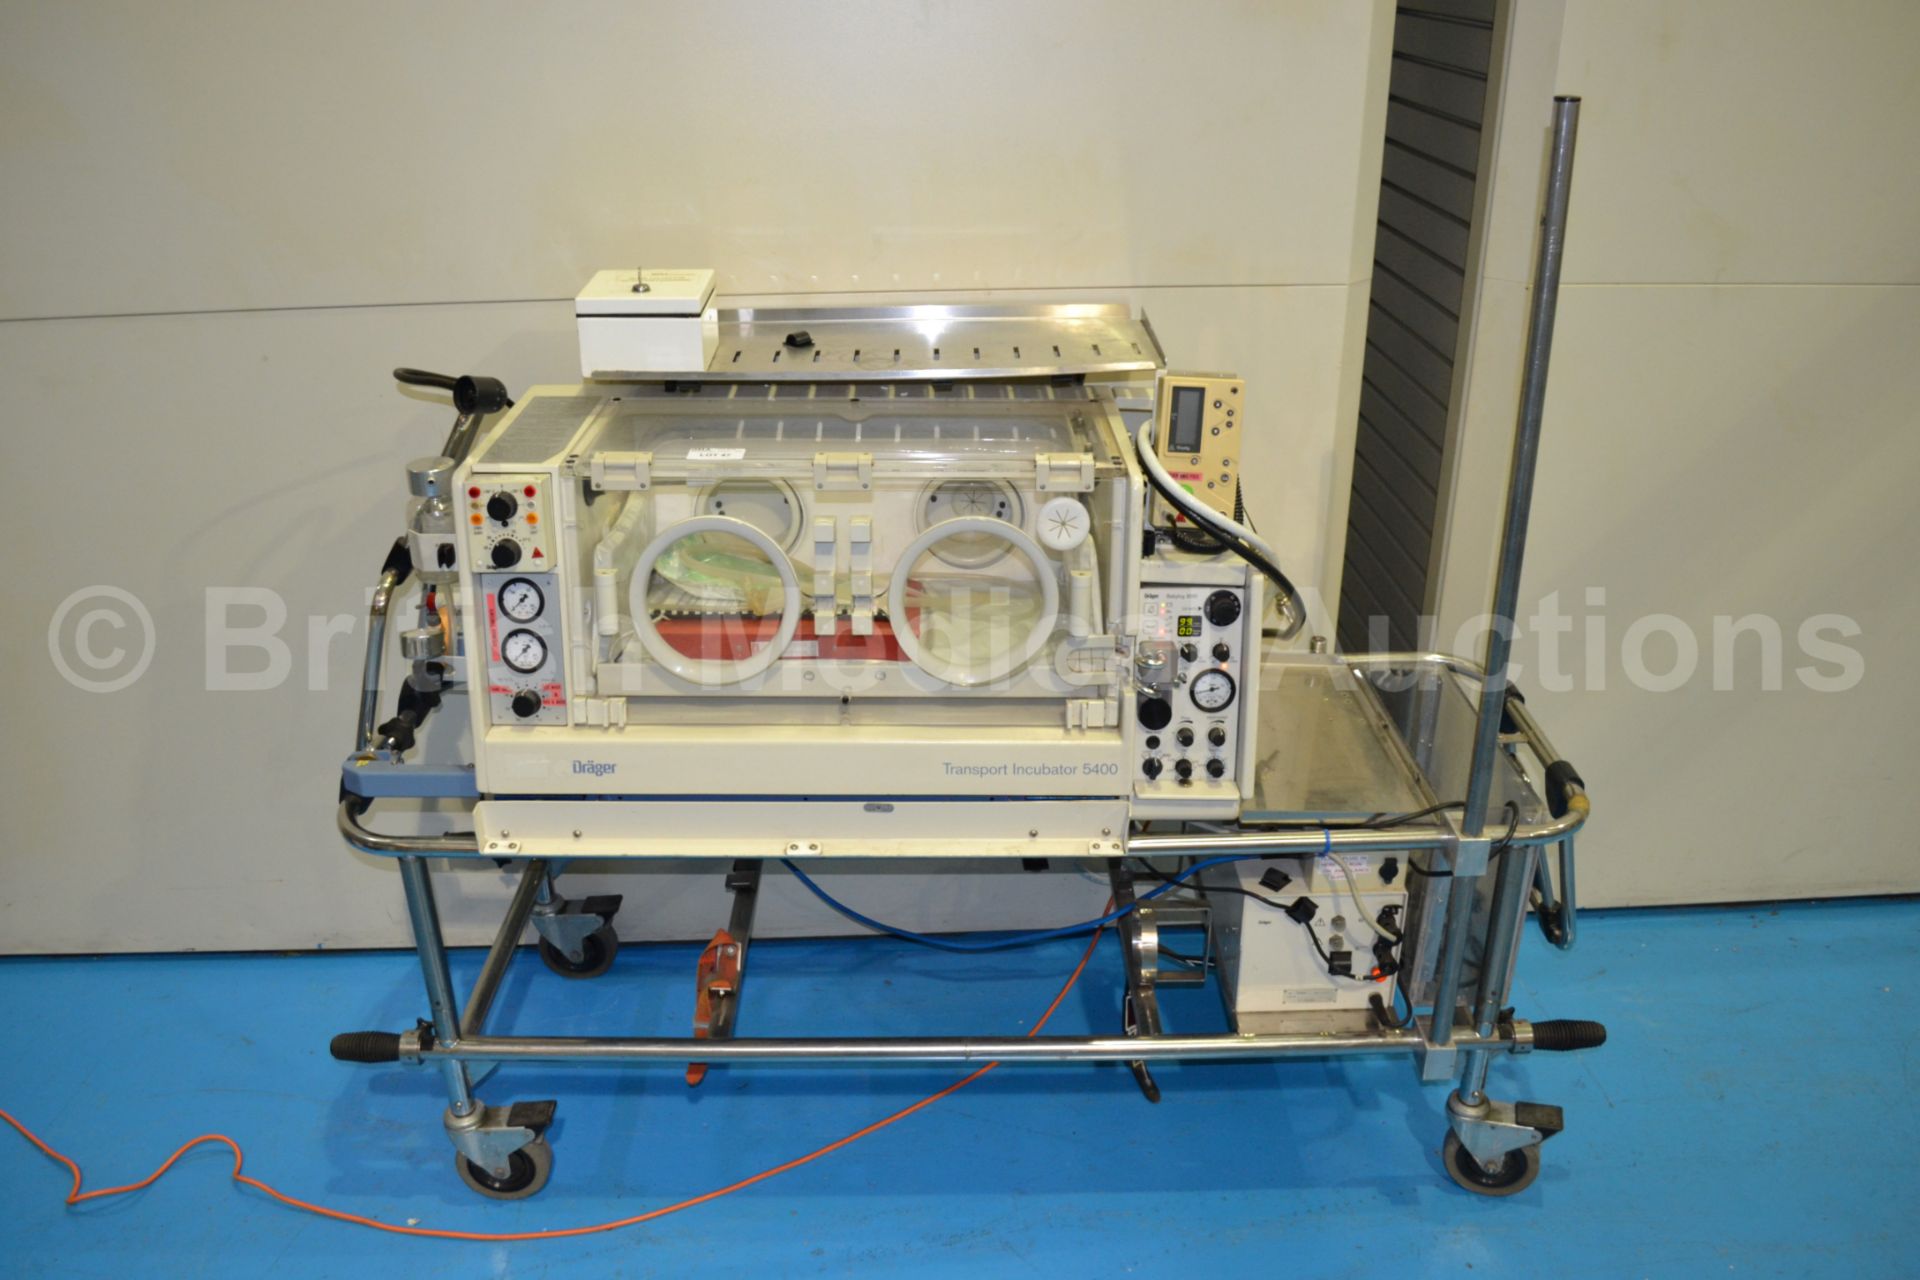 Drager Transport Incubator 5400 with Drager Babylo